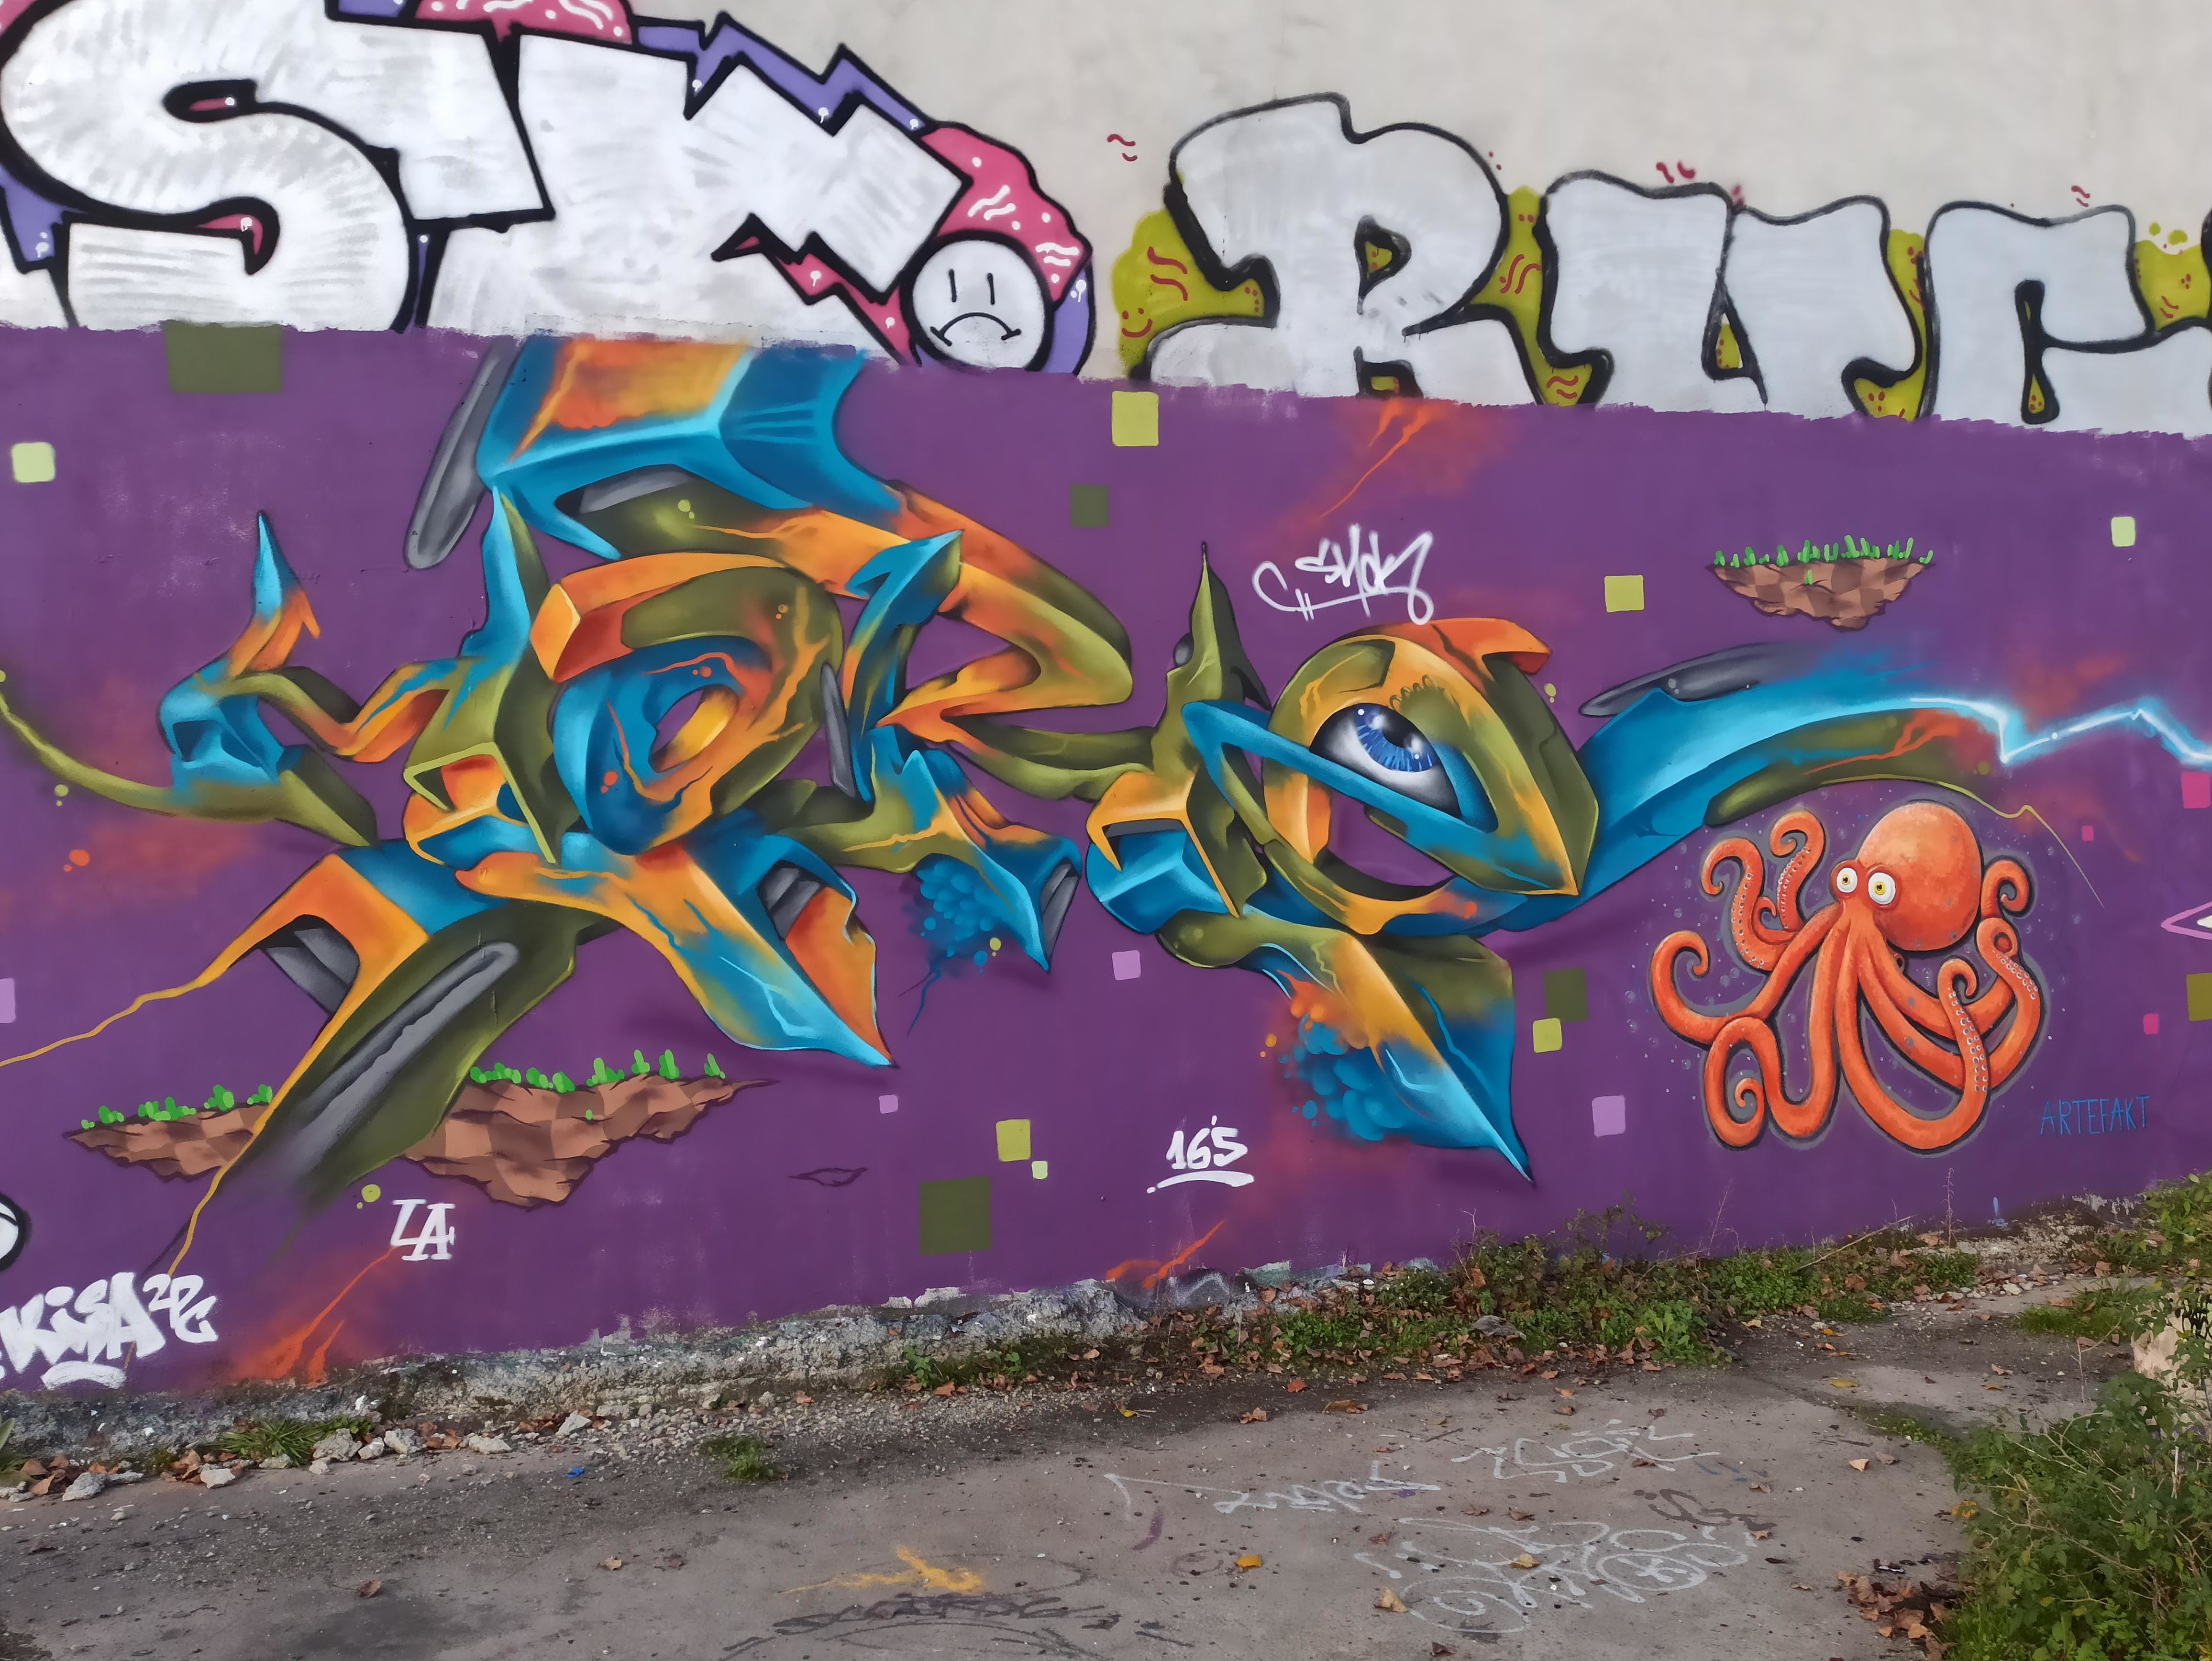 Graffiti 4670  captured by Rabot in Nantes France